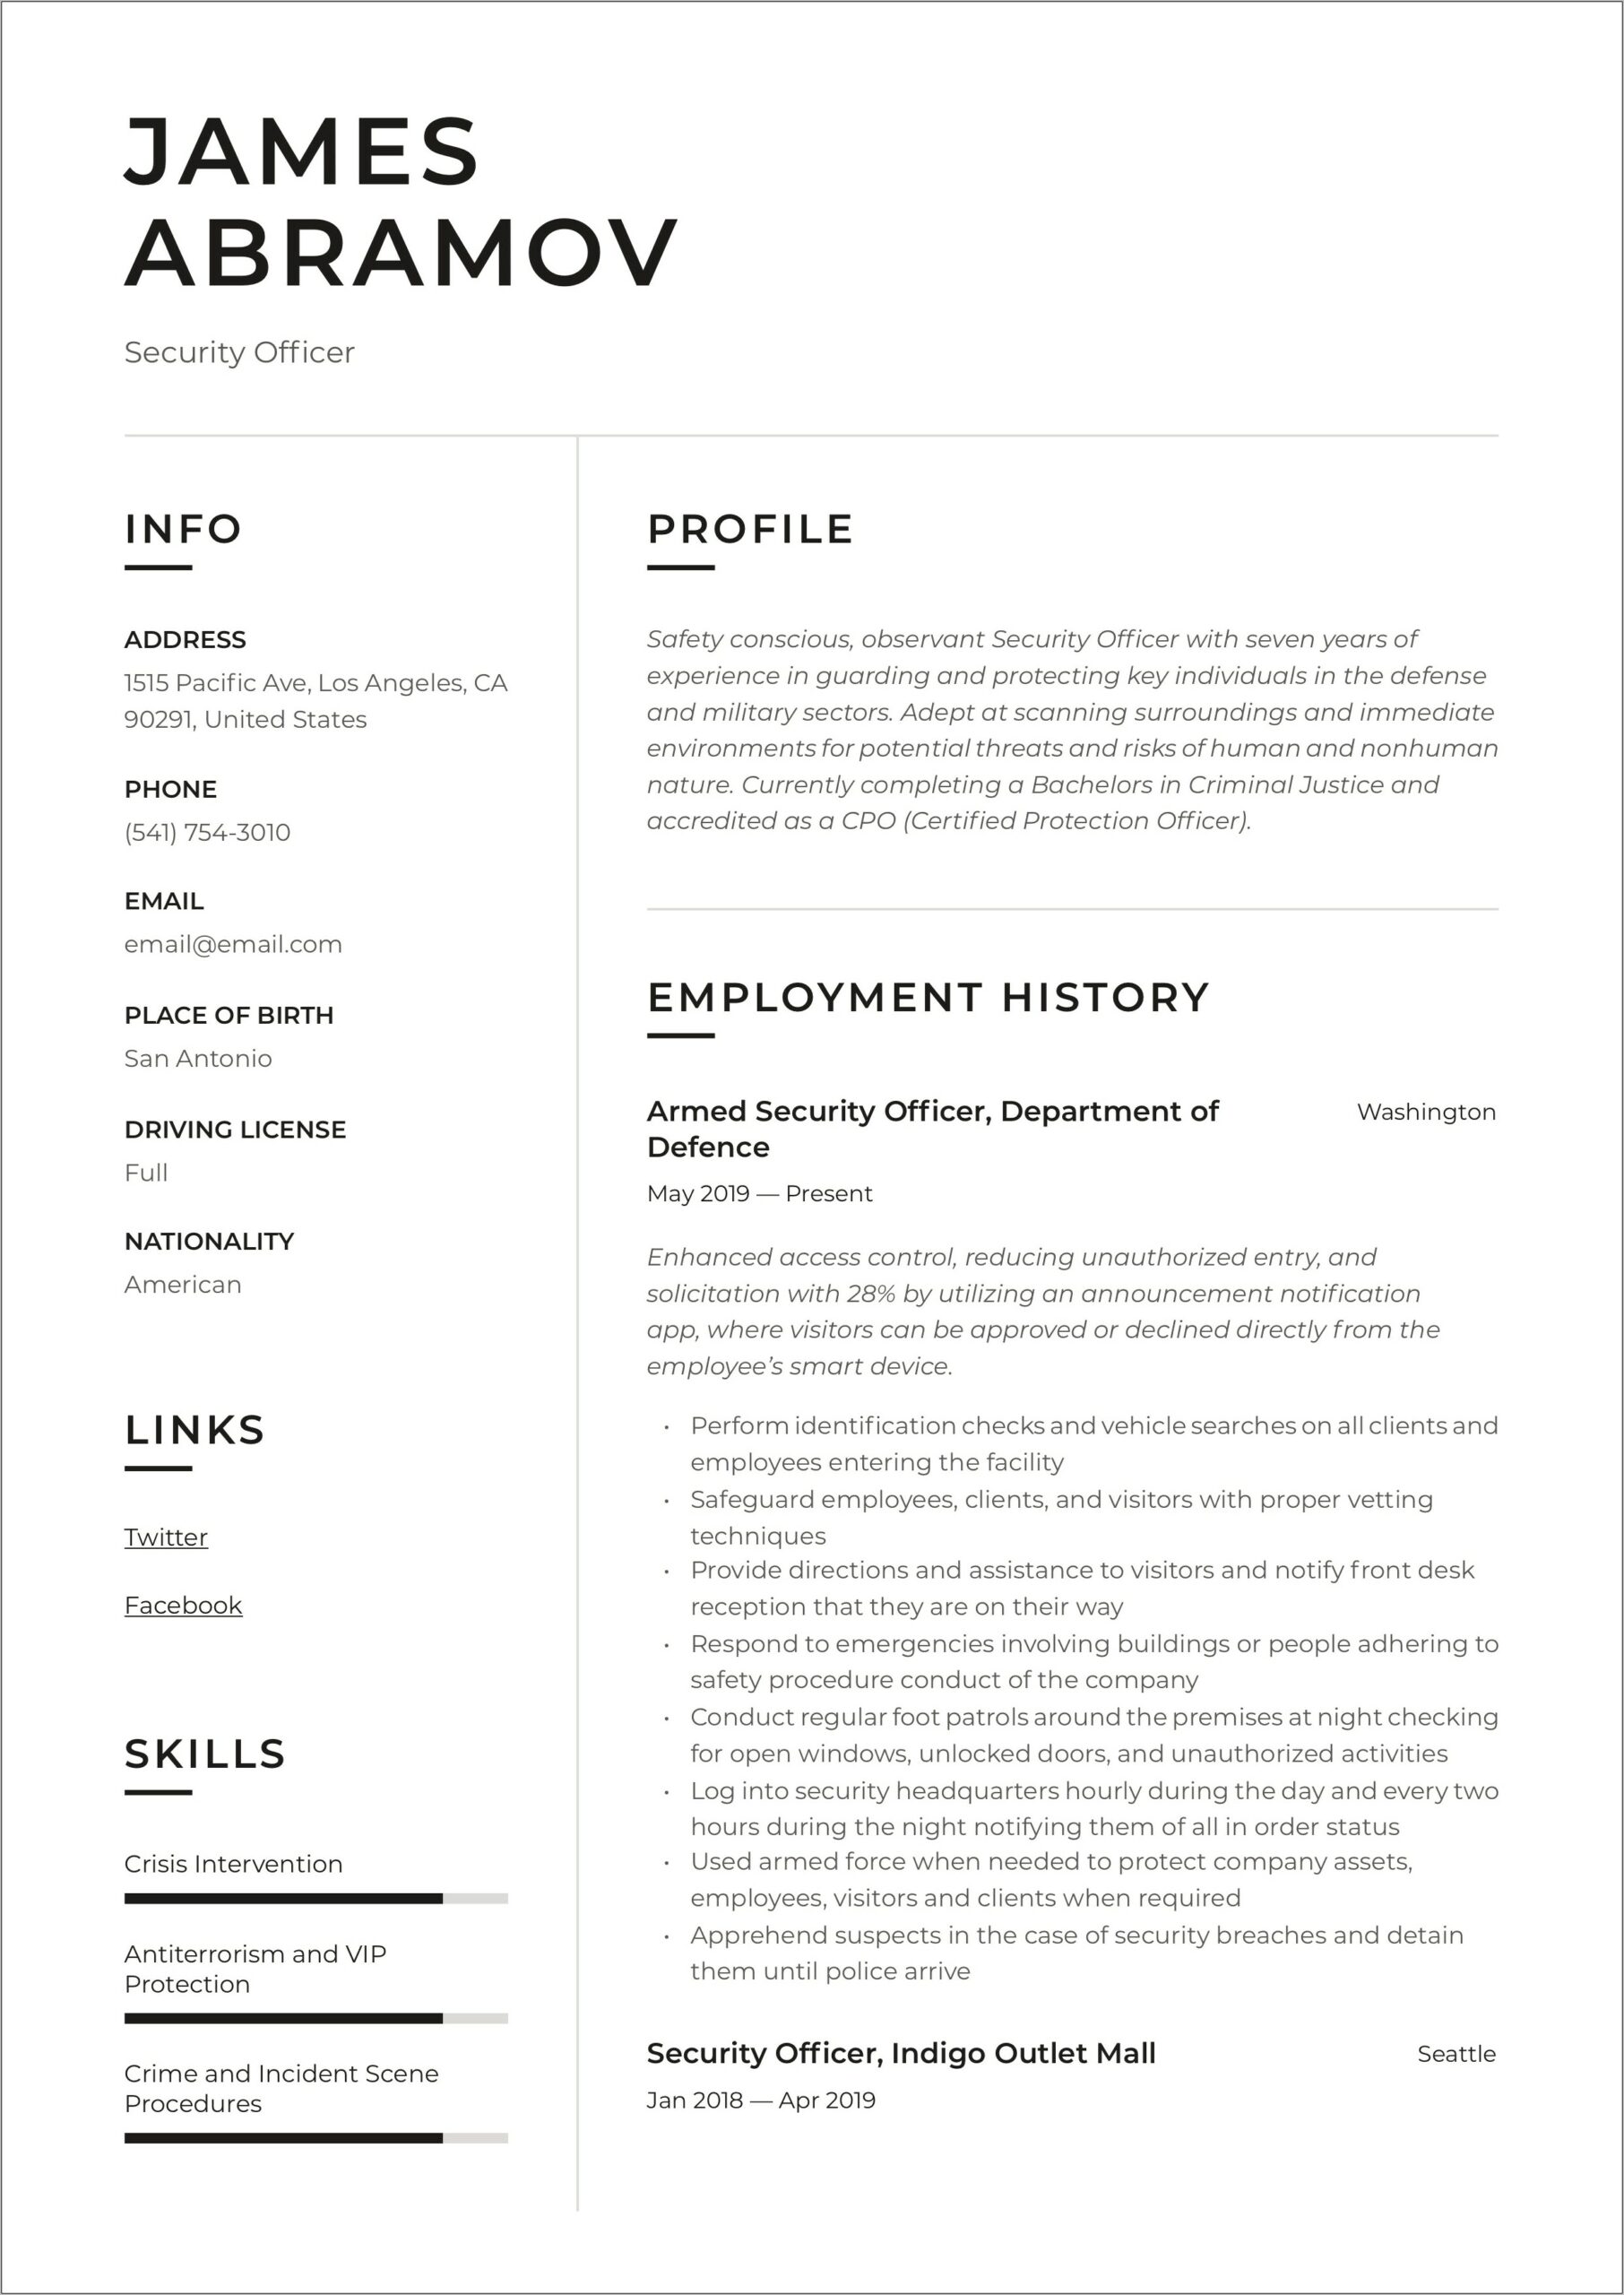 Sample Resume Of Security Guard In Canada